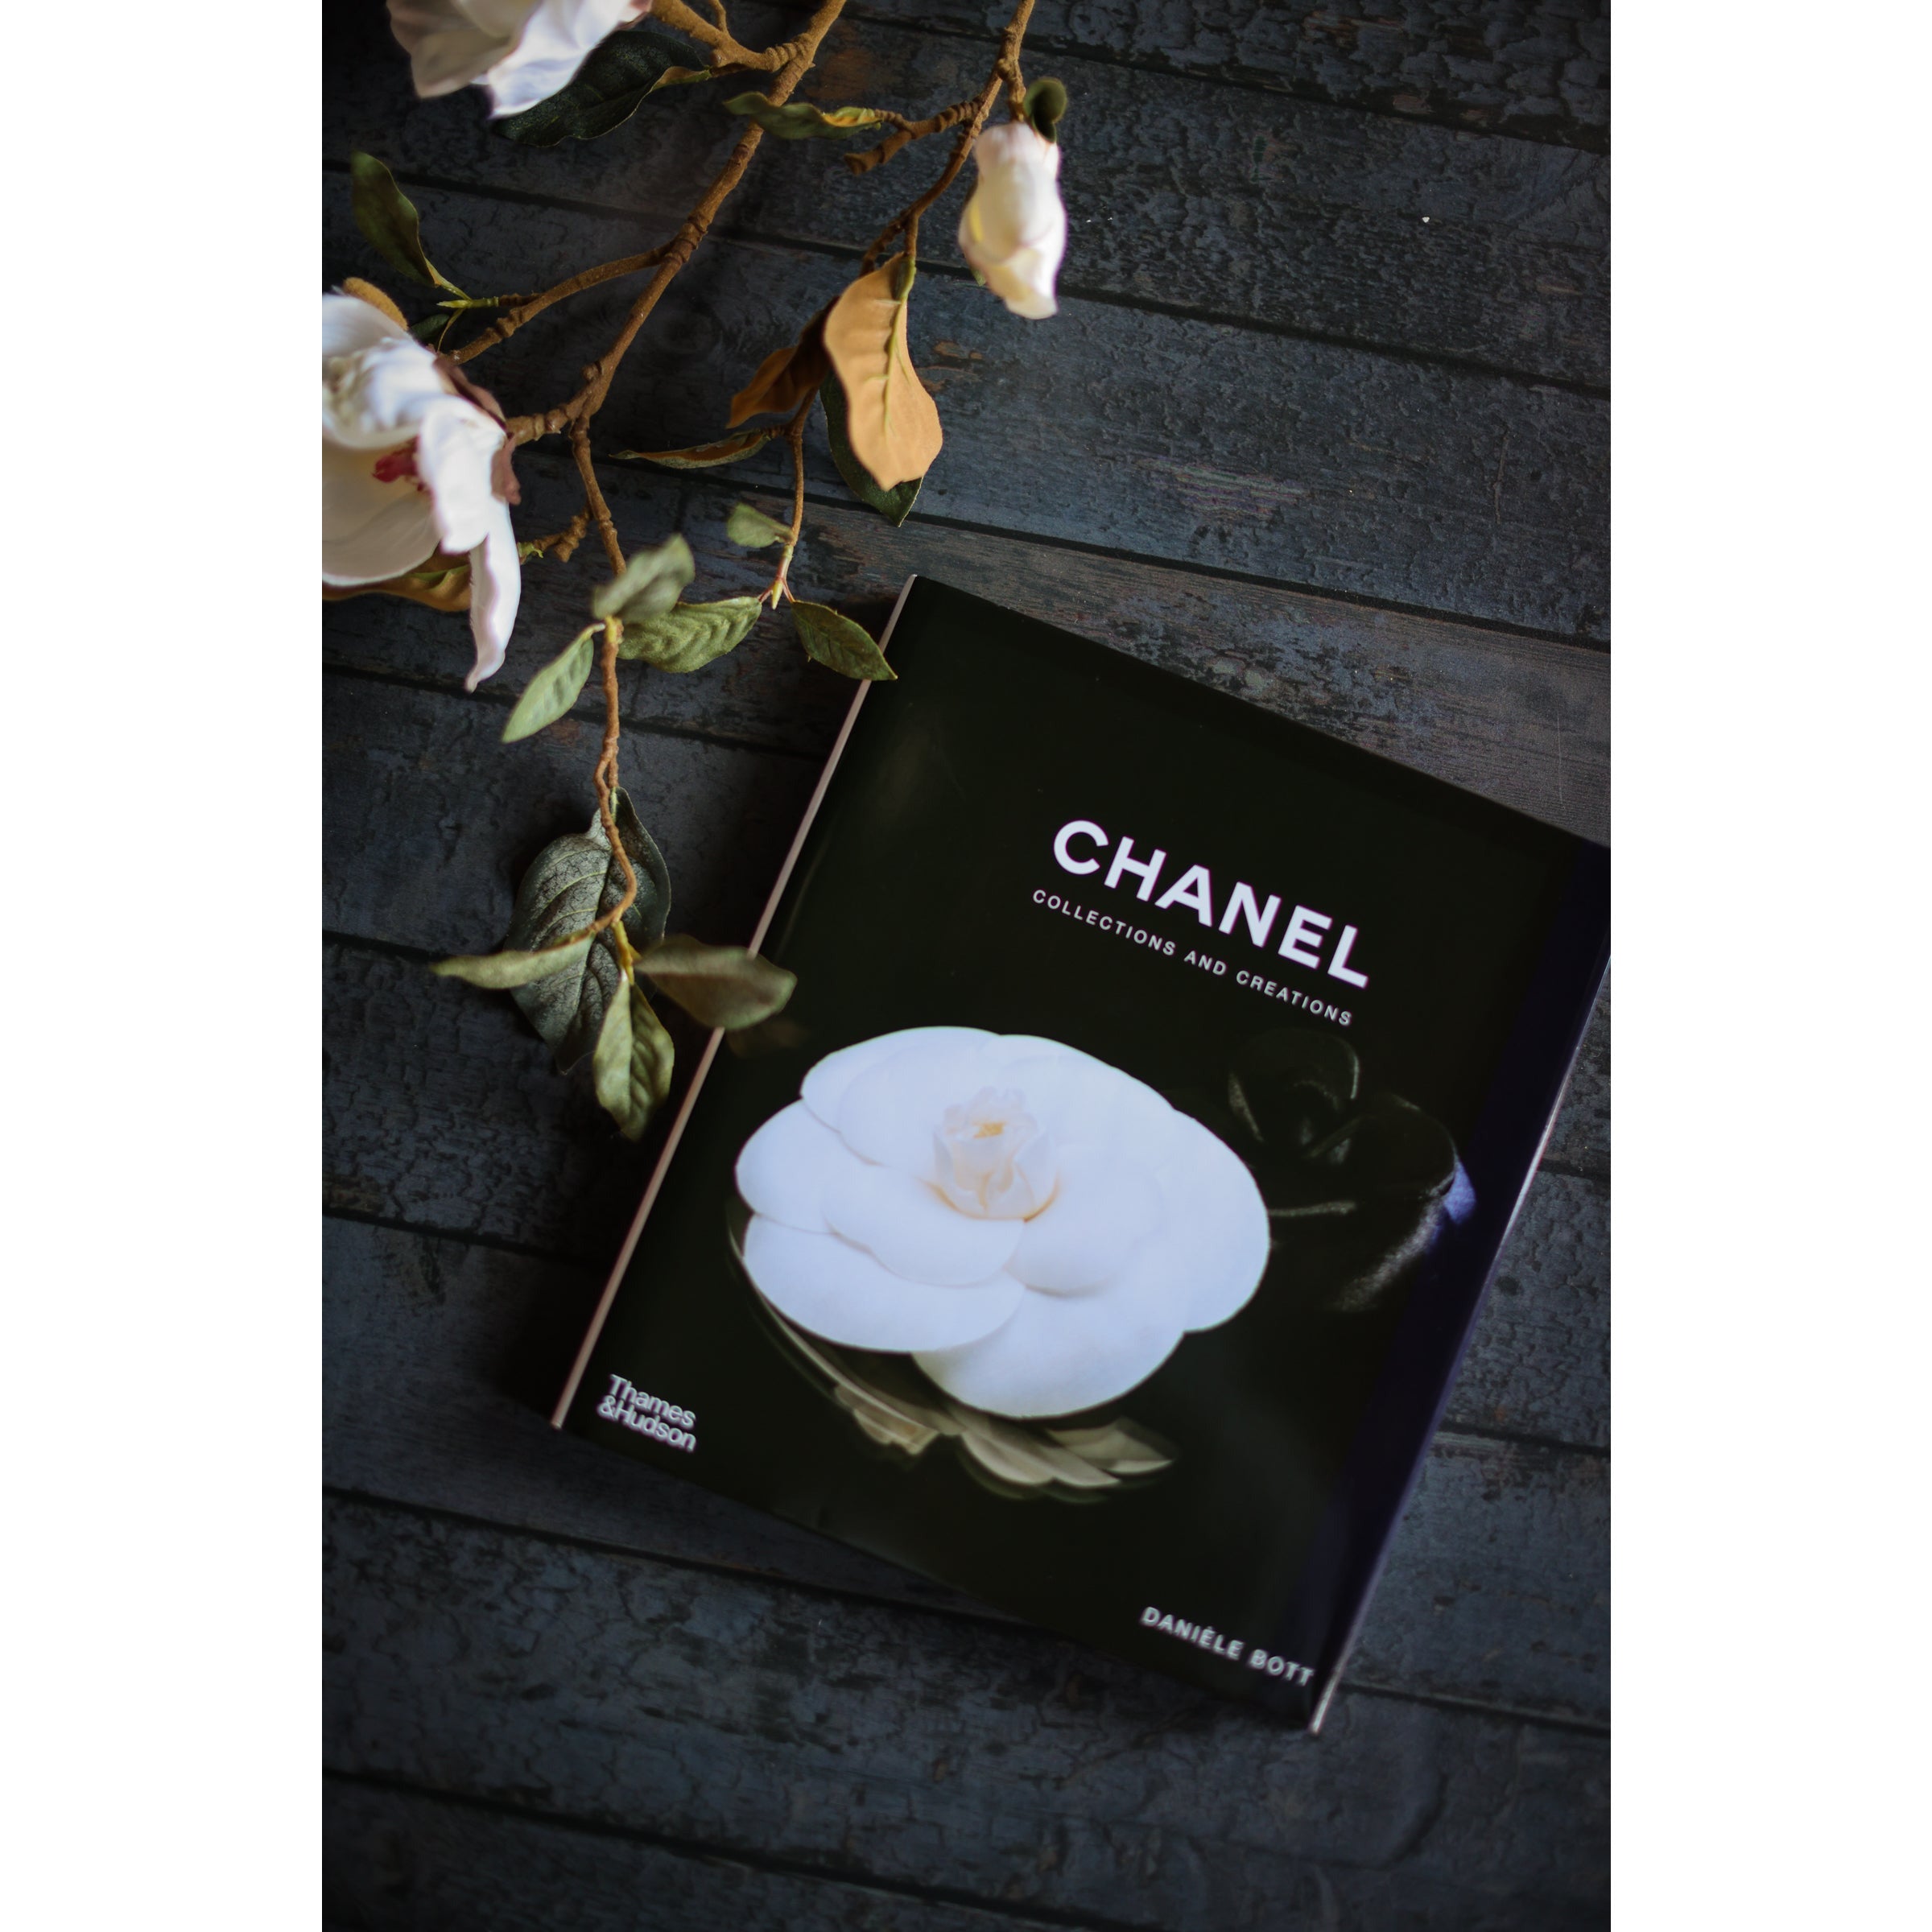 Chanel: Collections and Creations Hardcover